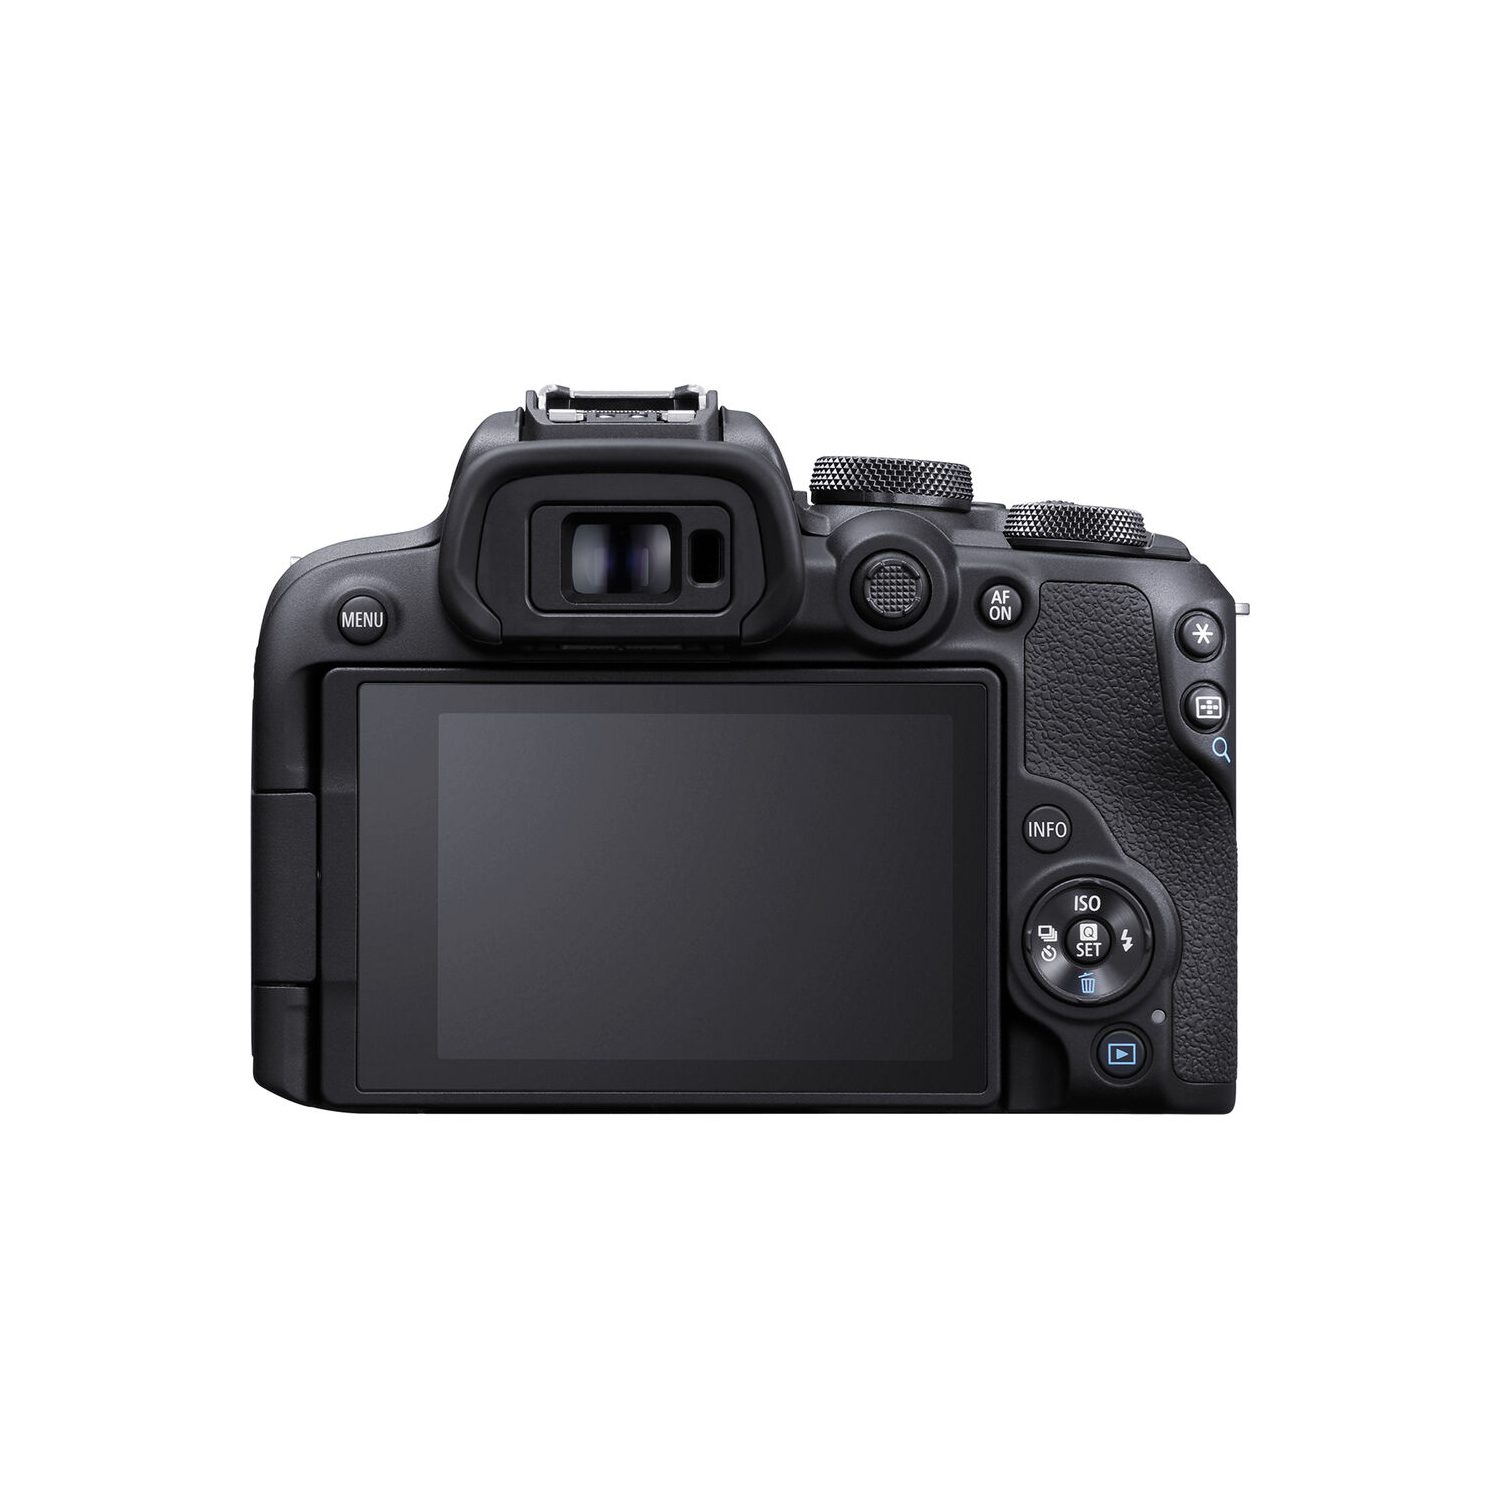 Canon EOS R10 Mirrorless Camera with 18-45mm Lens Kit